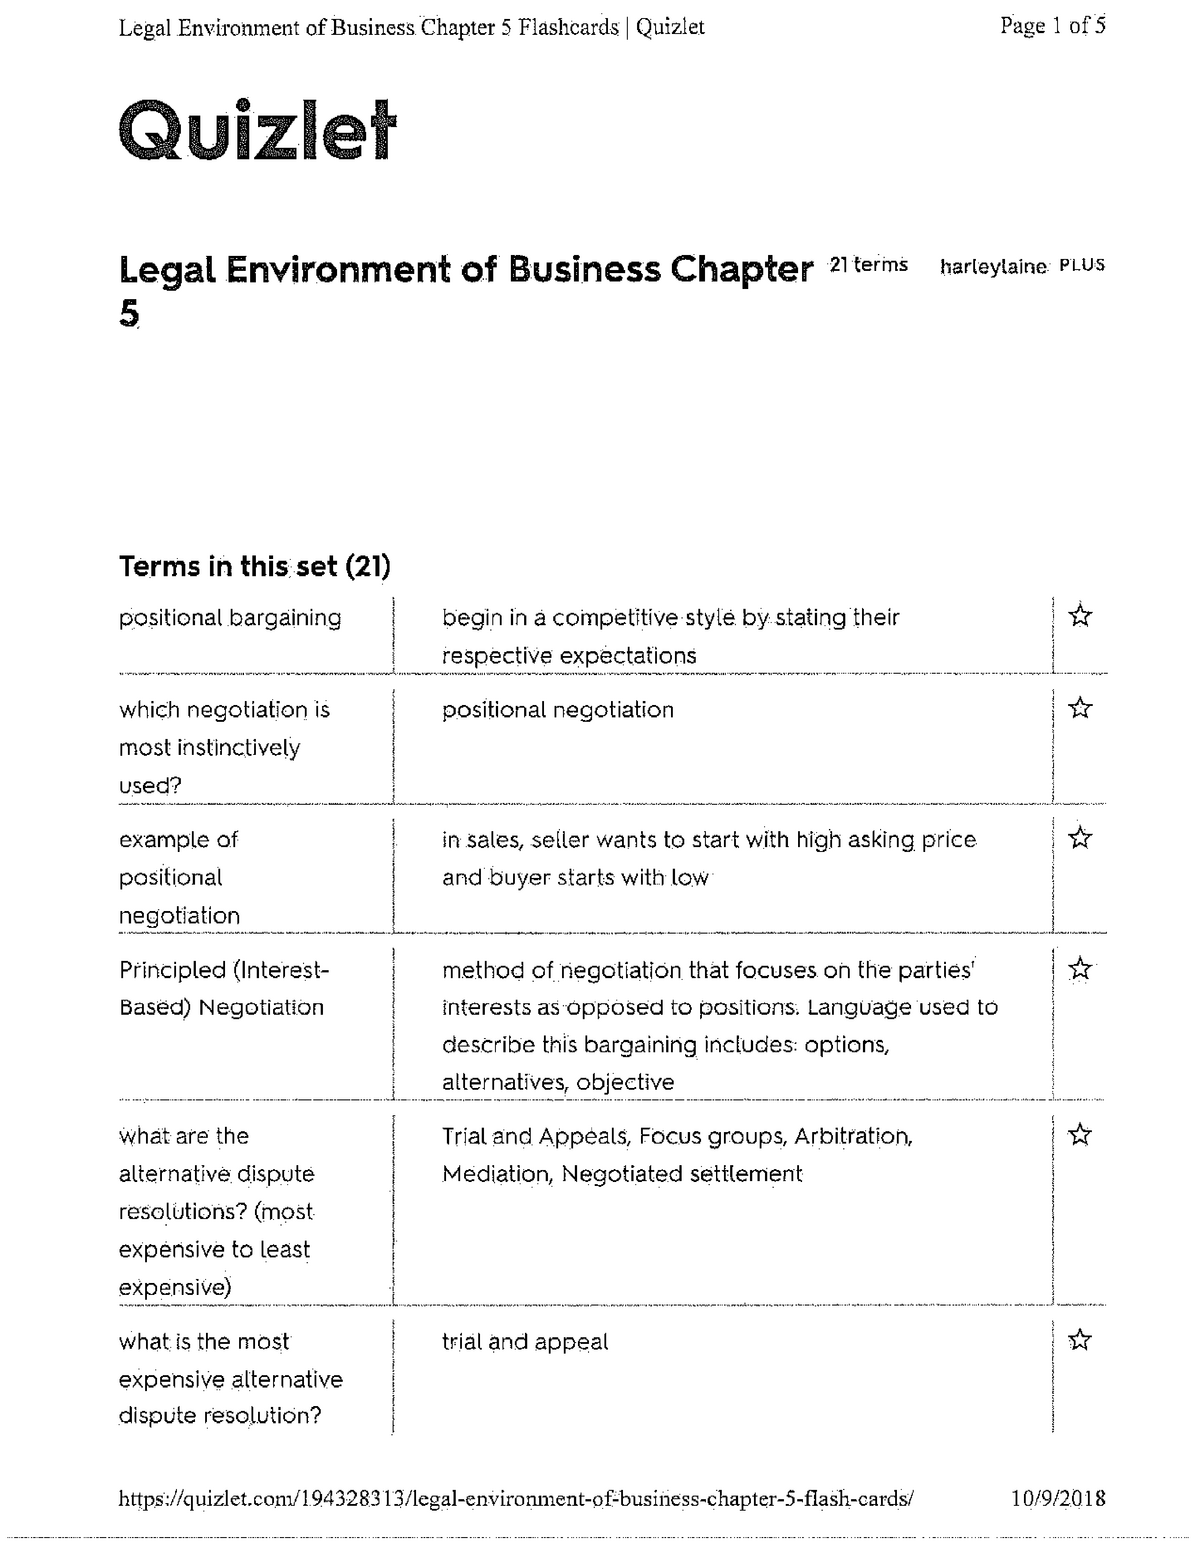 Quizlet - Legal Environment of Business. Chapter 5. FlaShCard-SJ